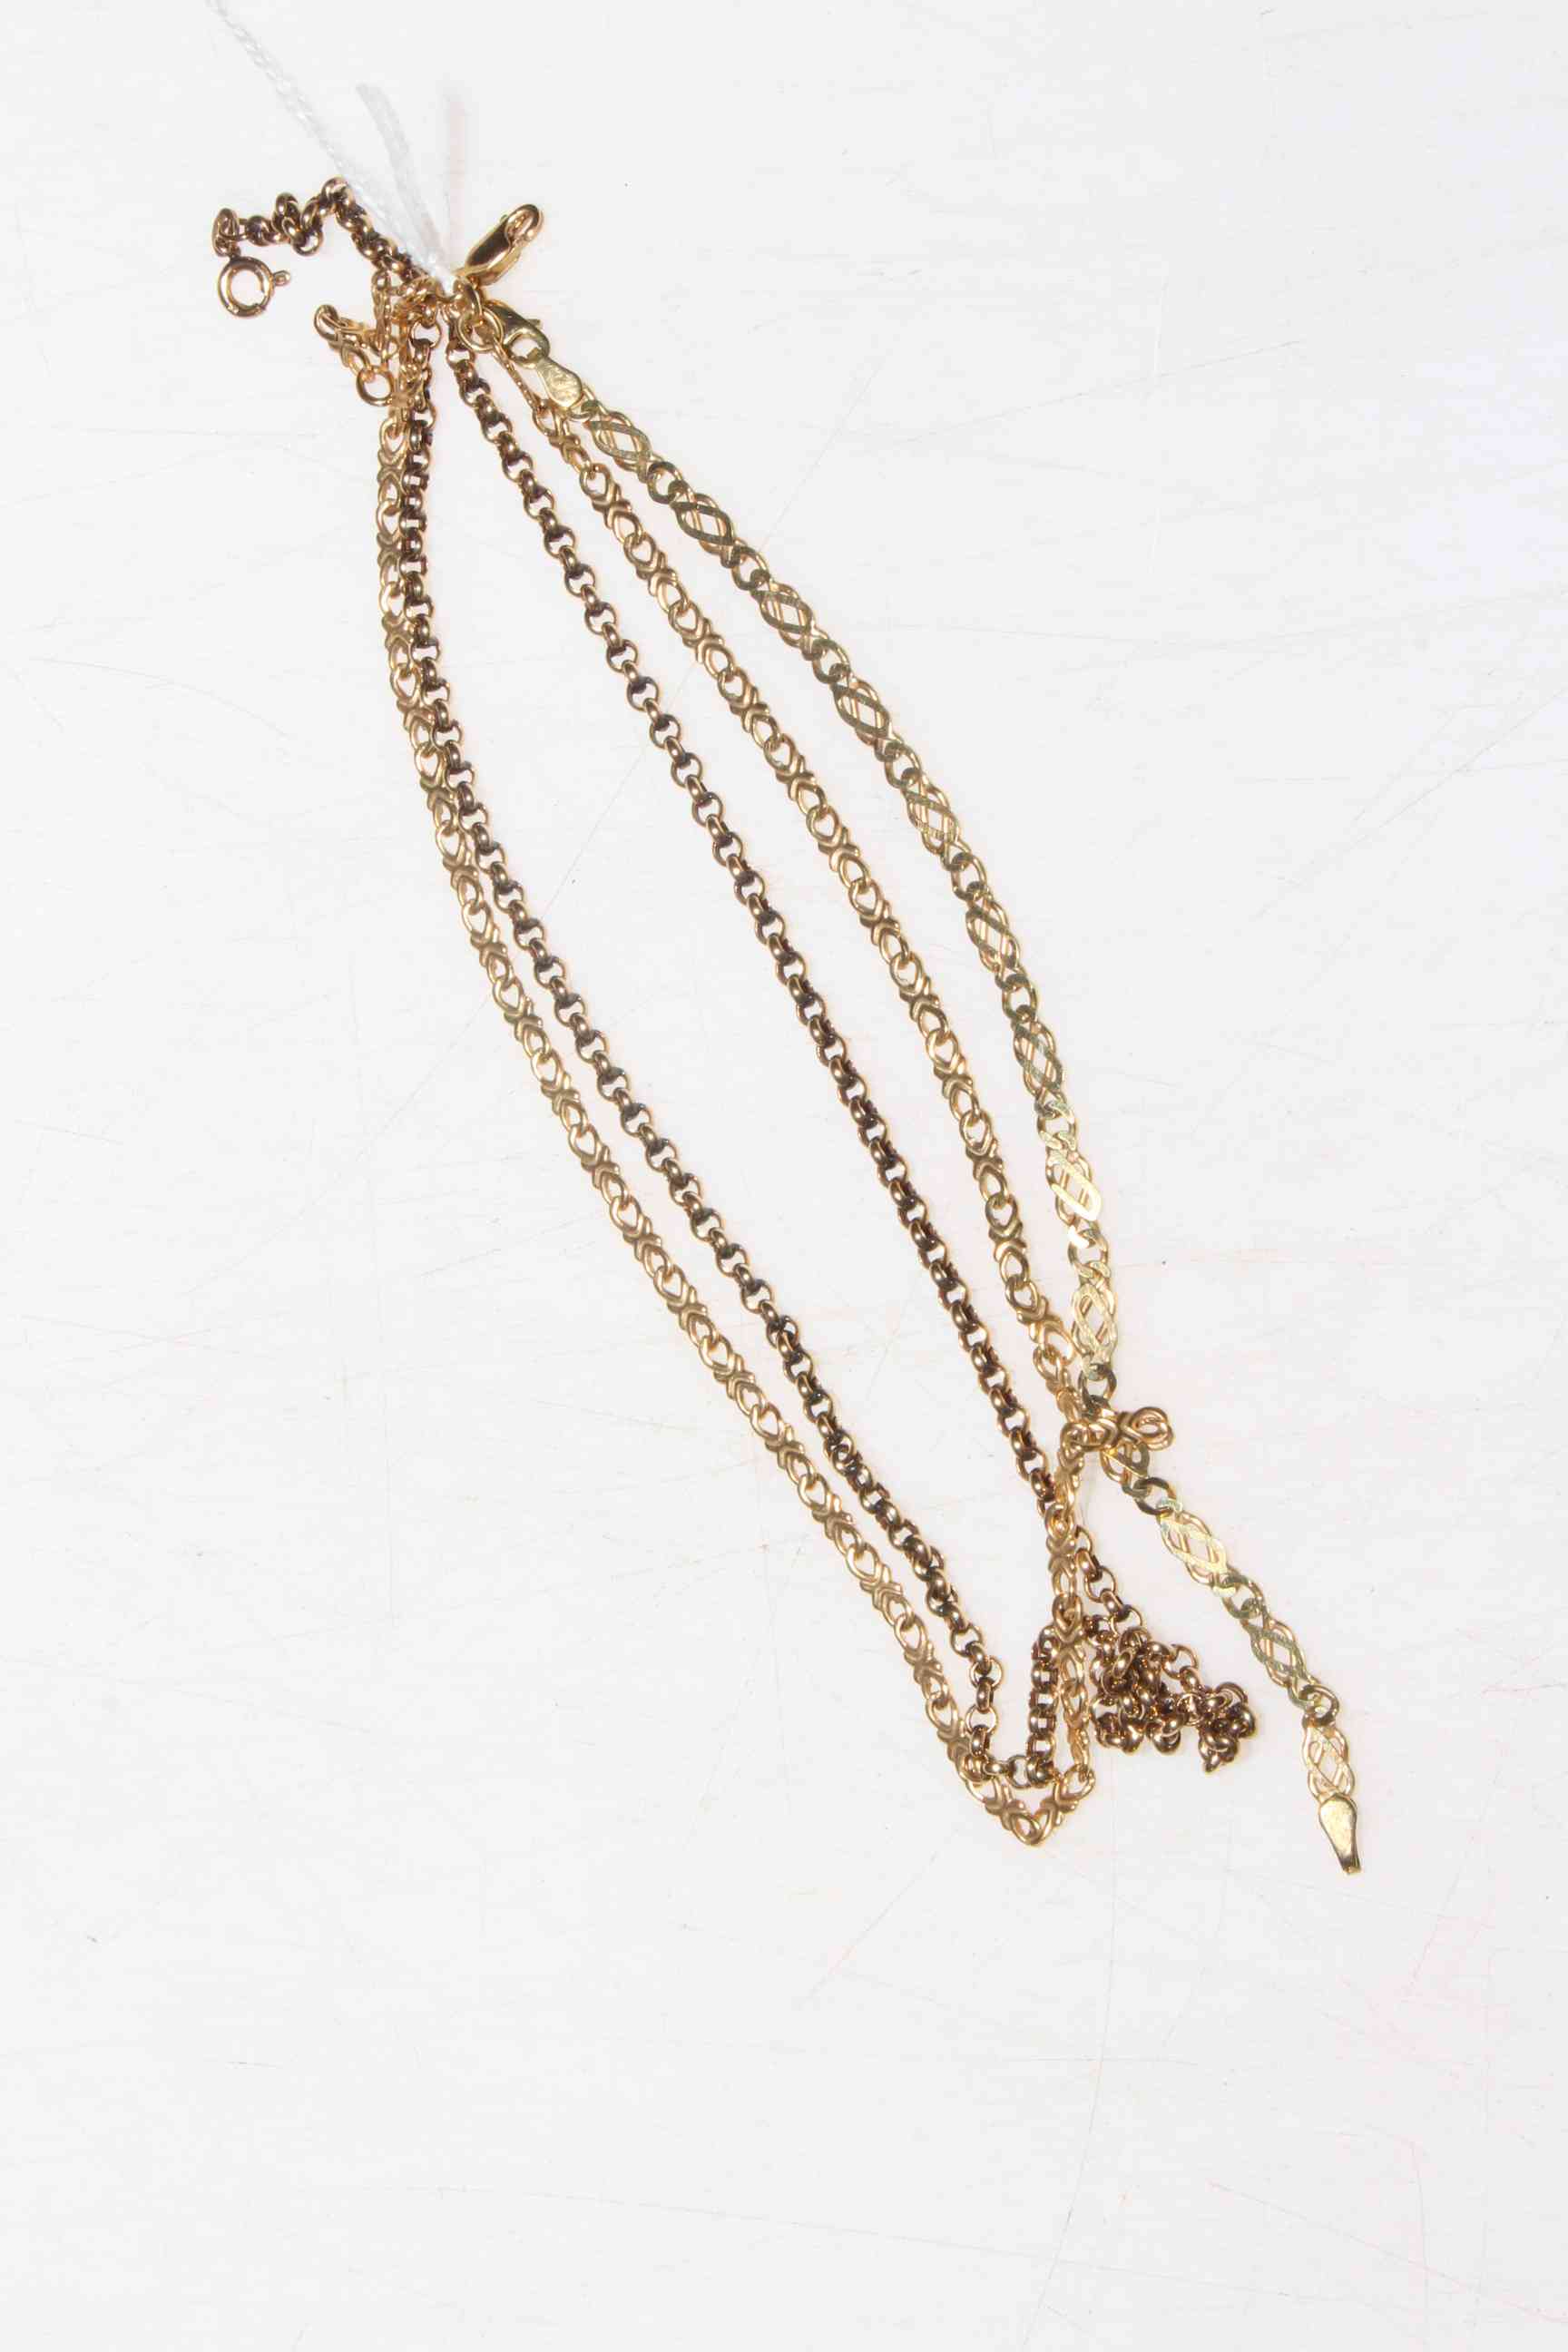 Three 9 carat gold chains, a bracelet and two necklaces.